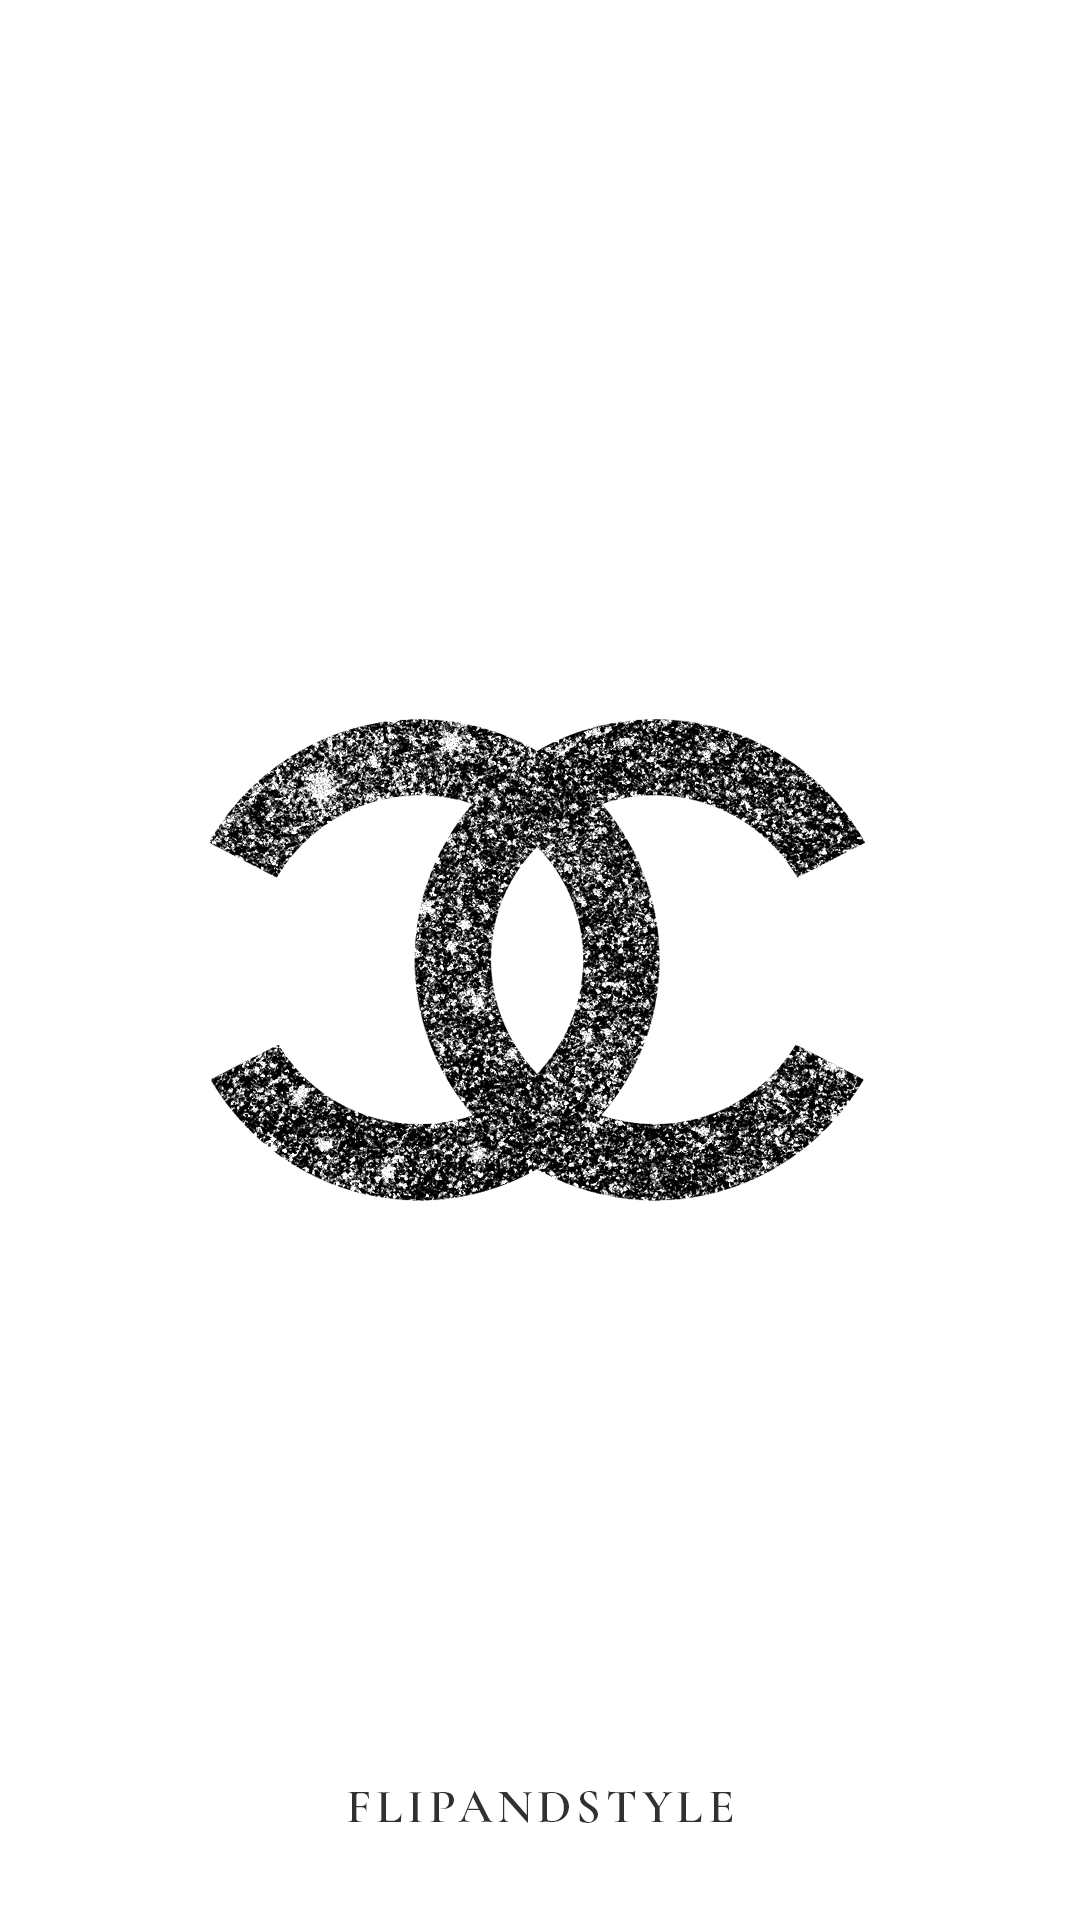 Chanel Iphone Wallpaper Explore more Chanel Iphone Coco Chanel Expensive  French Luxury Fashion wallpaper  Chanel wallpapers Chanel wall art Iphone  wallpaper